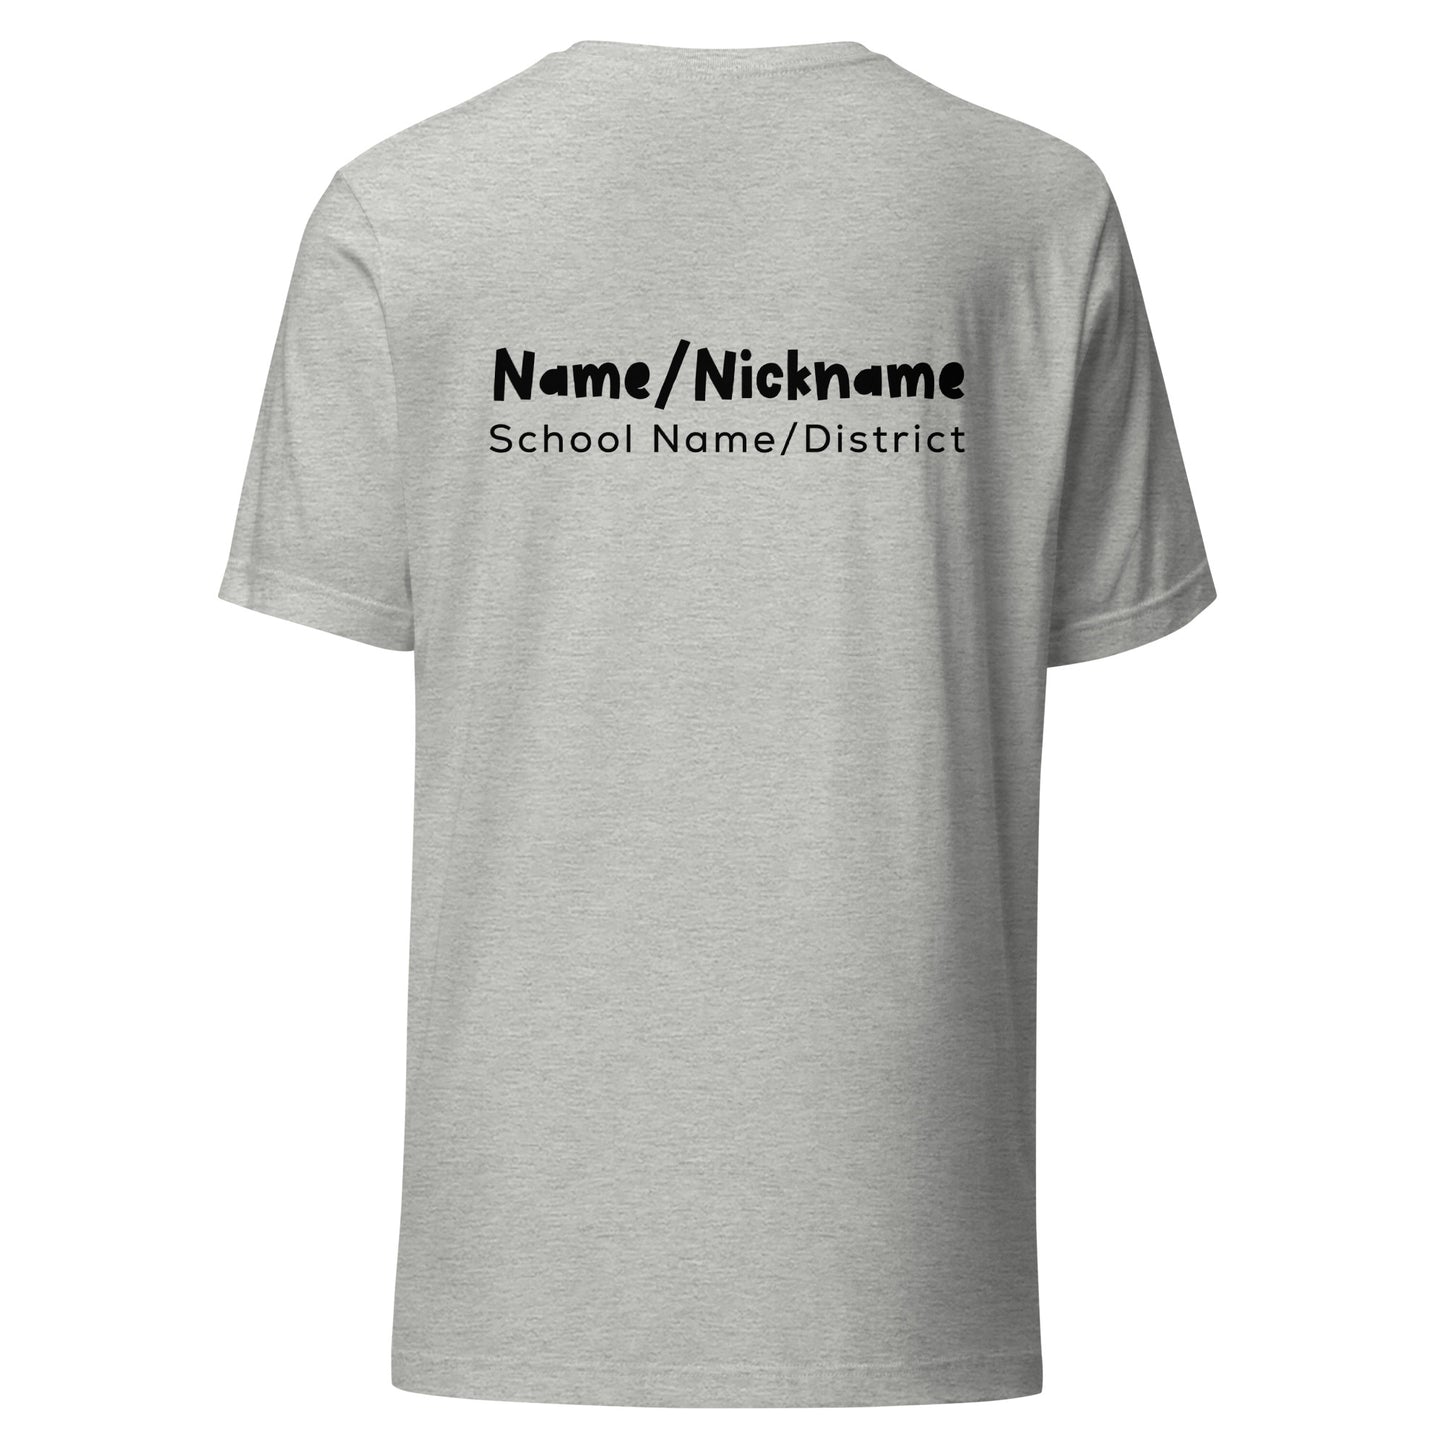 #SchoolBusDriverLife Personalized T-shirt (Brown skin tone)